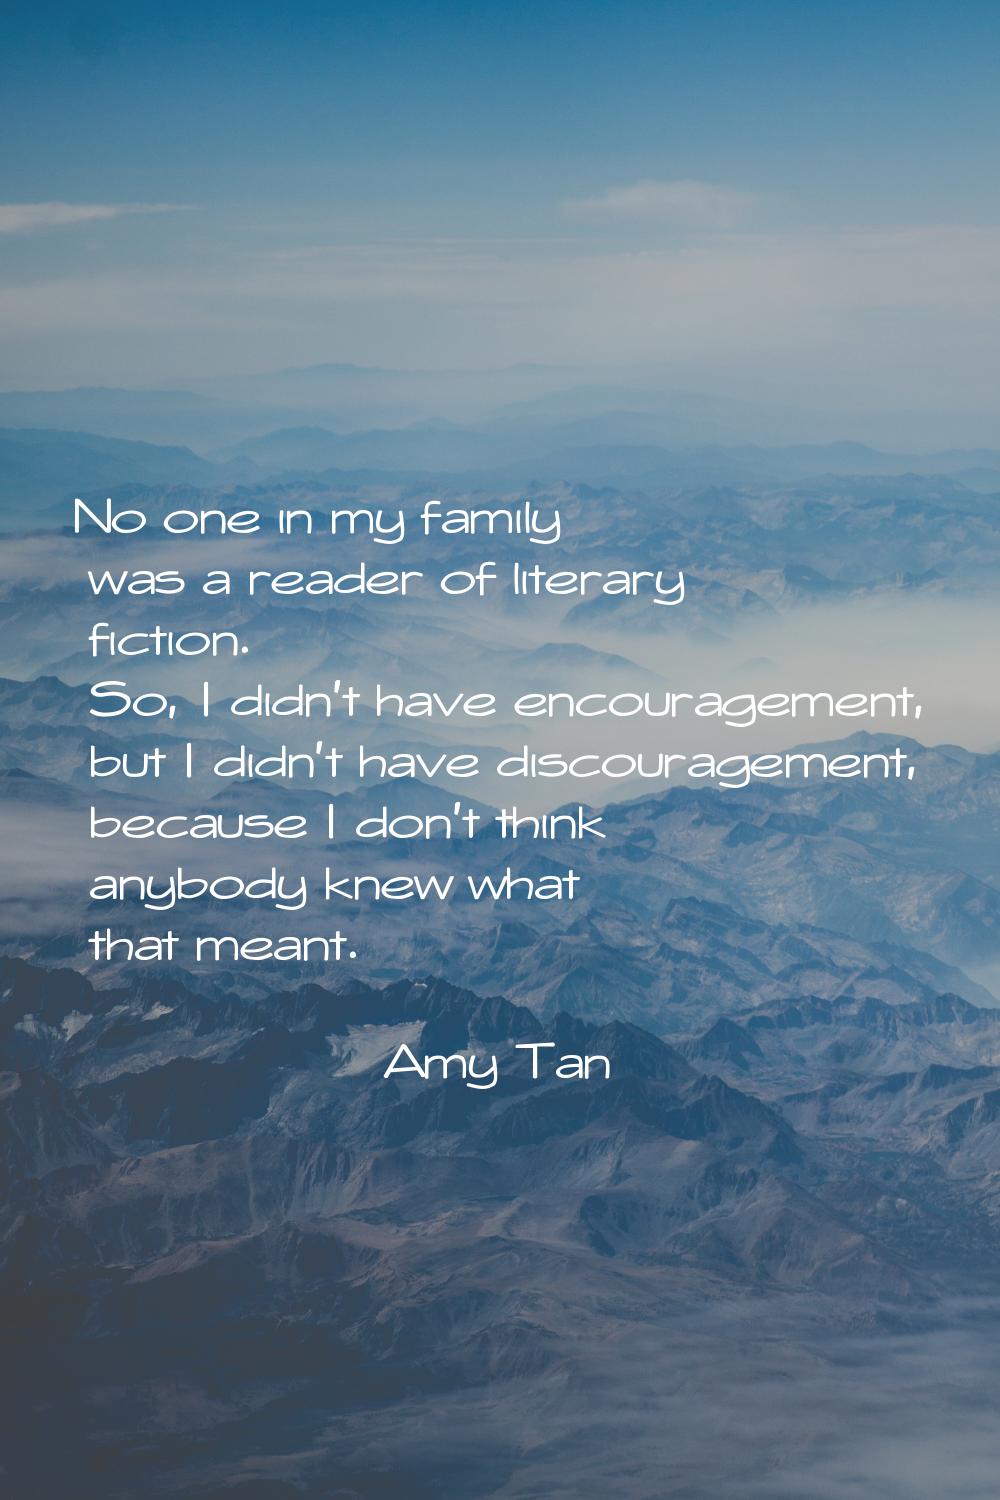 No one in my family was a reader of literary fiction. So, I didn't have encouragement, but I didn't